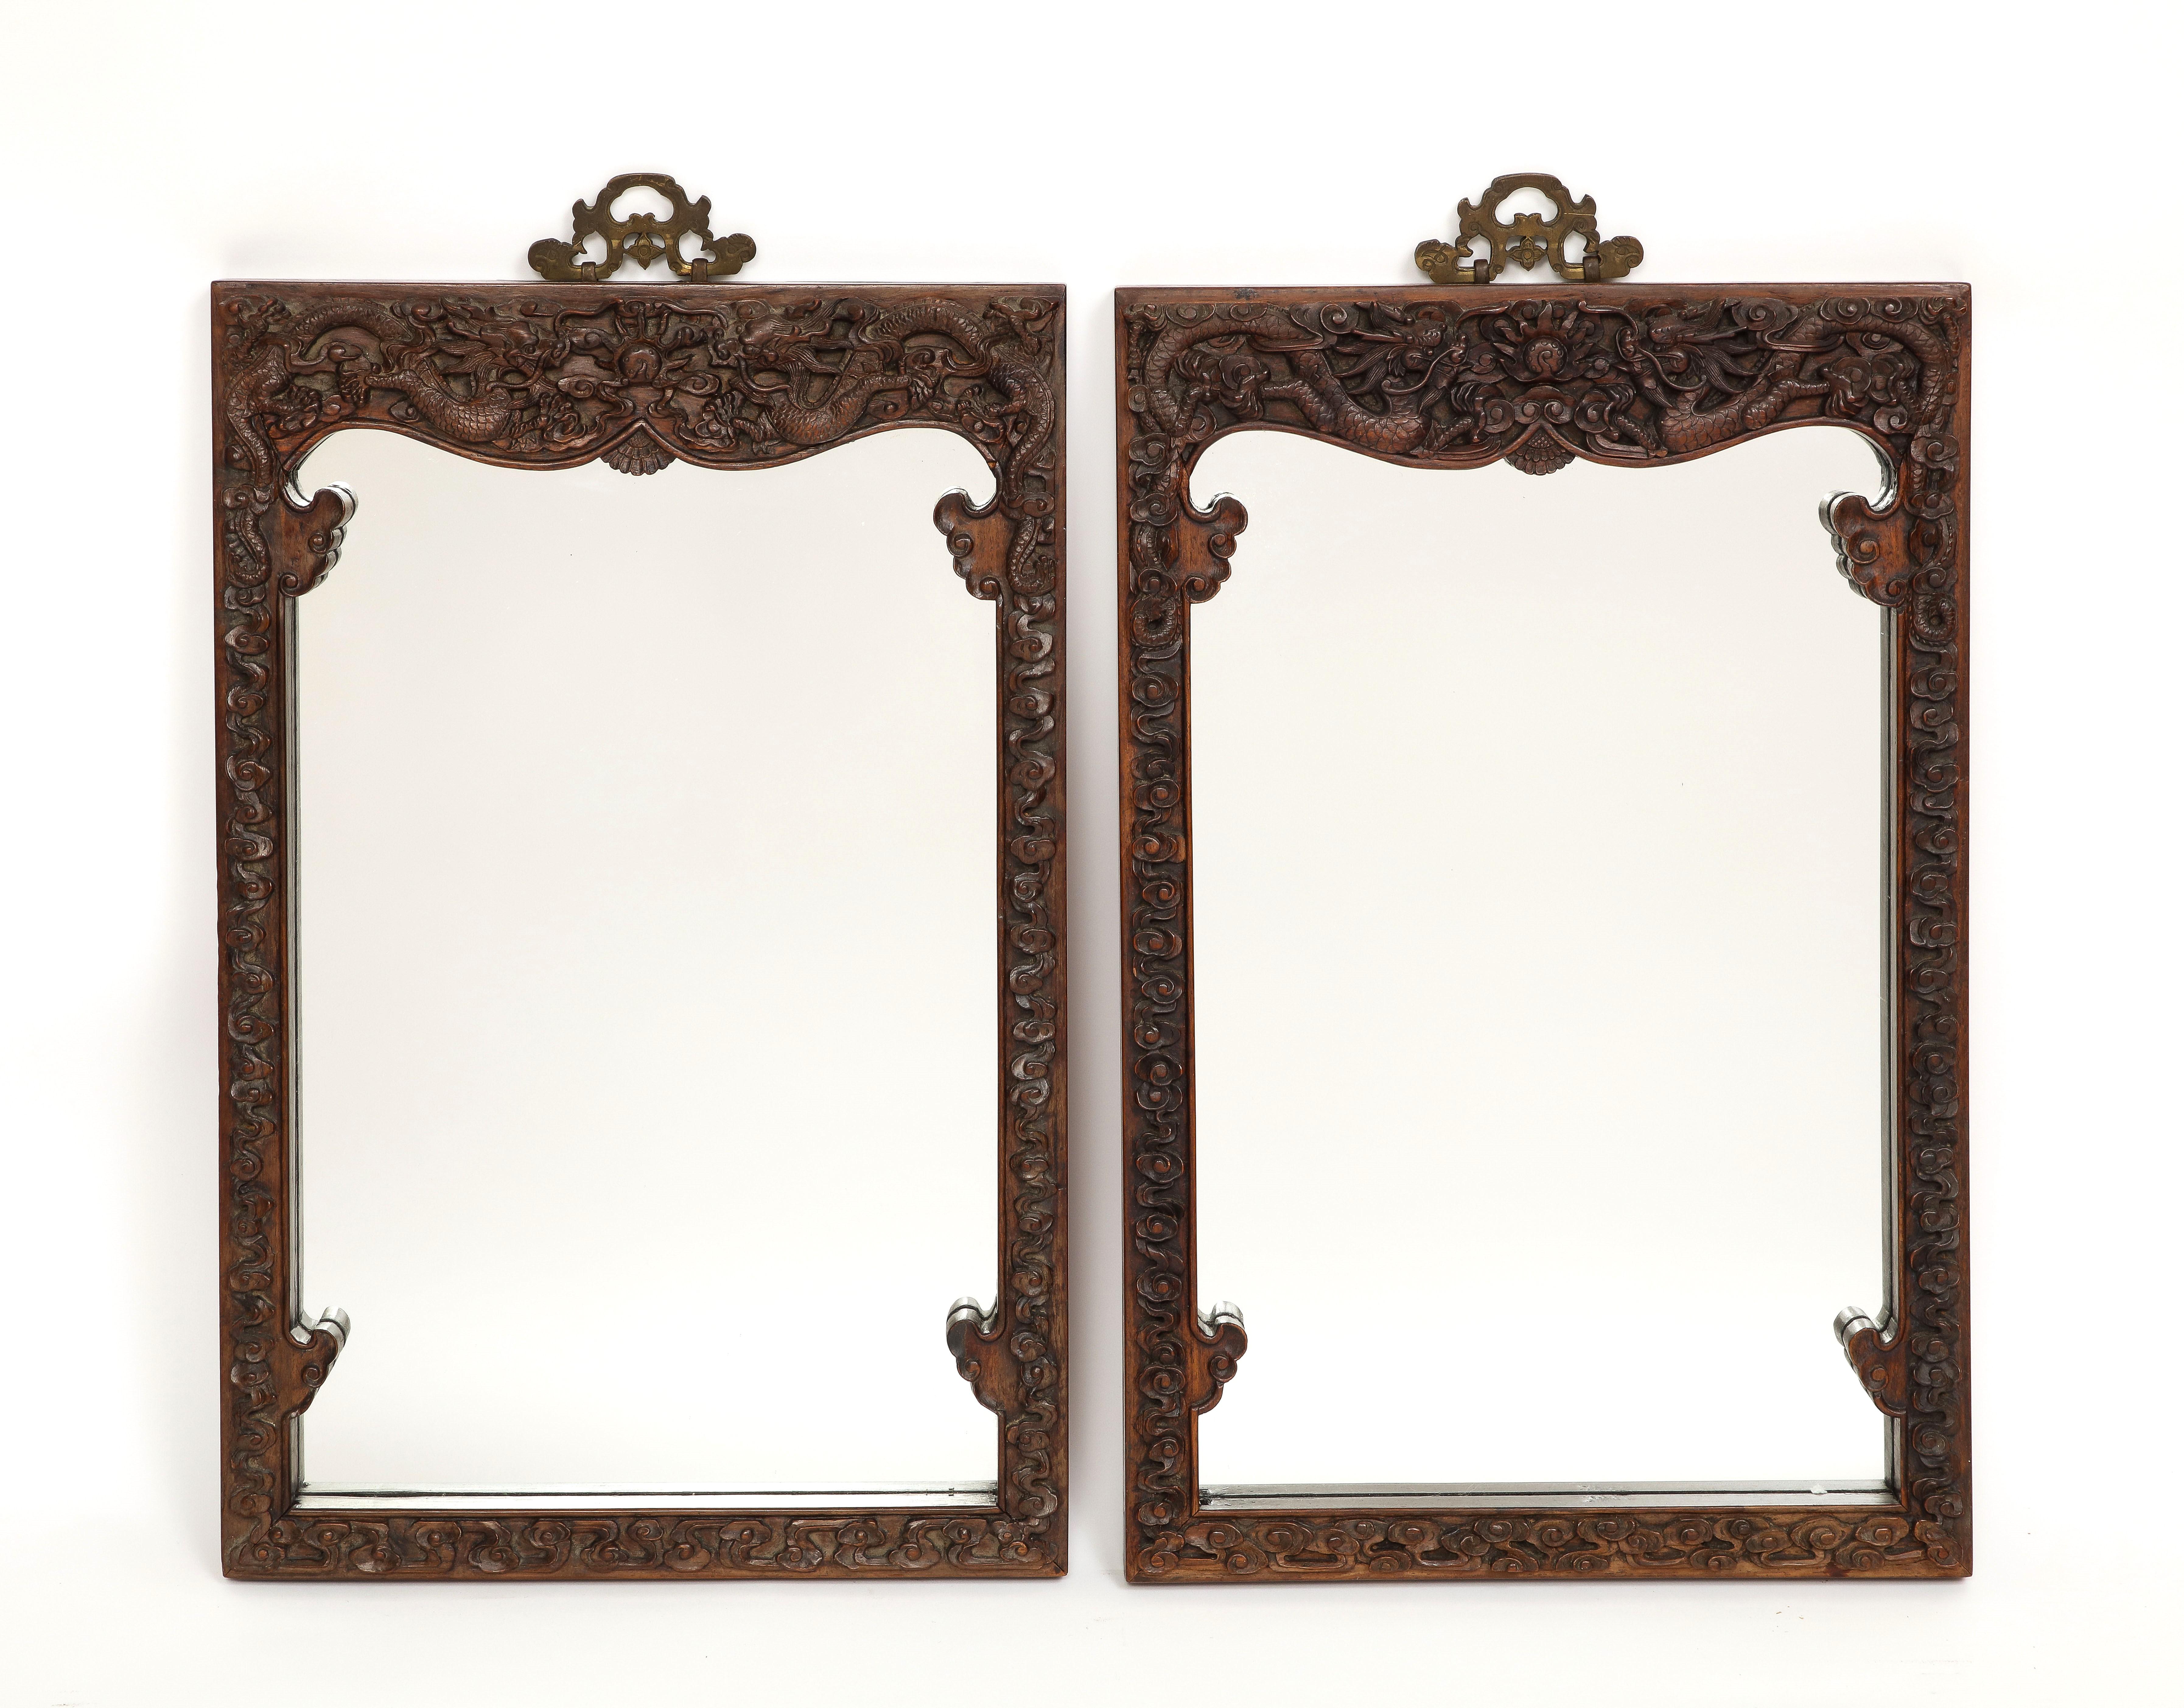 A pair of 20th century or earlier Chinese hardwood hand carved five-claw dragon mirrors. Each is hand carved with high relief Imperial five-claw dragons flying in the air. They also include hand carved elements of the sun, clouds, and flowers. Each